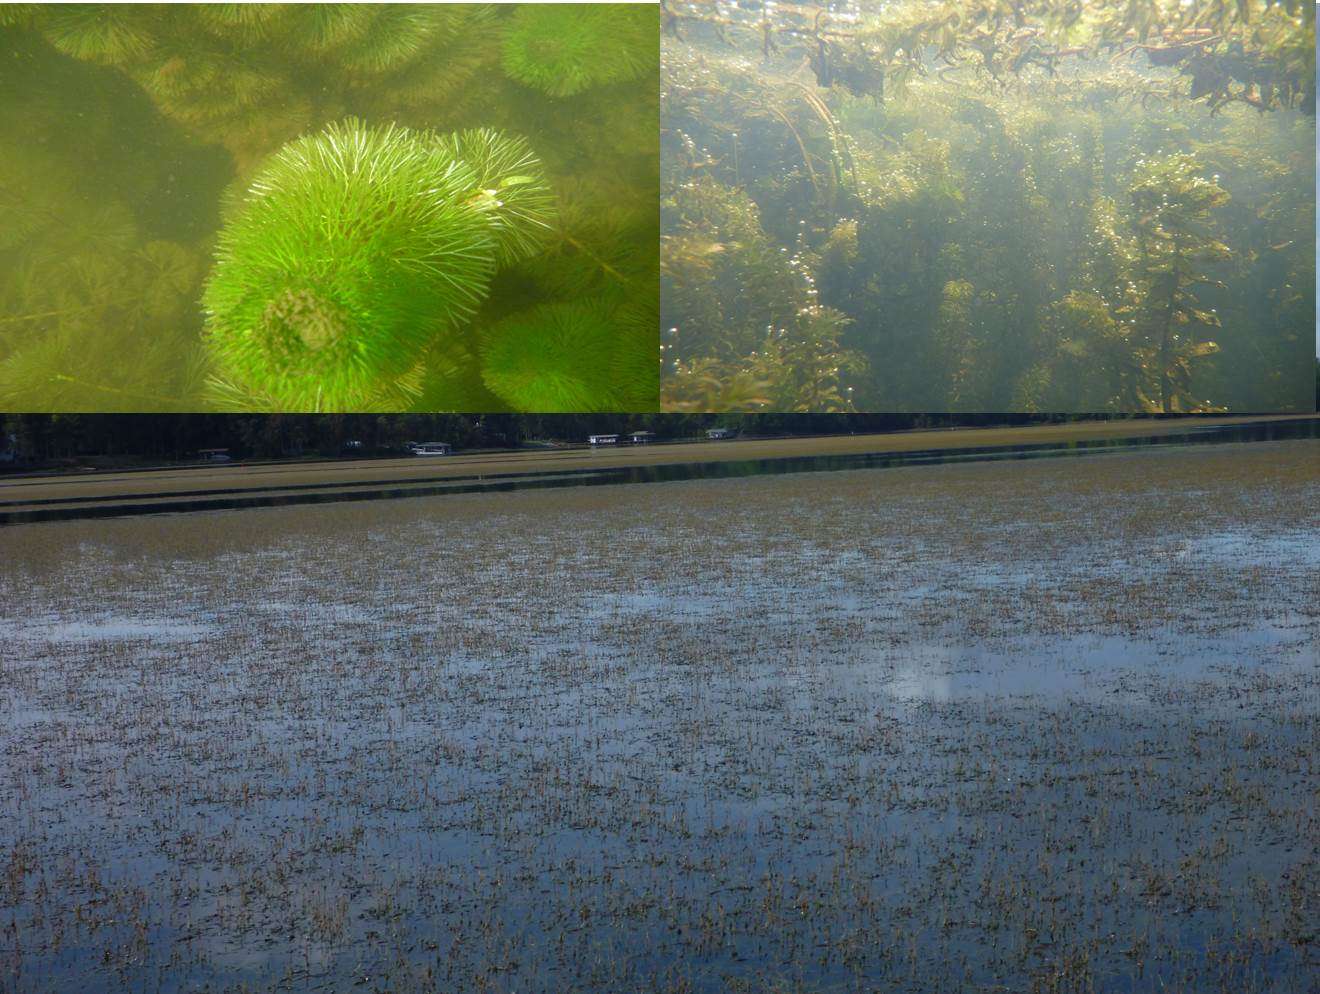 Lastly, and arguably the most popular among fishermen, are the submersed plants. Timing means everything when fishing many submersed species, and many will notice them at the surface during certain times of year. As new sprouting occurs well out of sight in the spring, a good depthfinder will help you key in on this yearâs grassbeds. Many anglers simply refer to all submersed plants in two categories â milfoil and hydrilla â but there are many more native submersed species for which you may be mistaking these invasives that are better for the fish AND the fisherman.